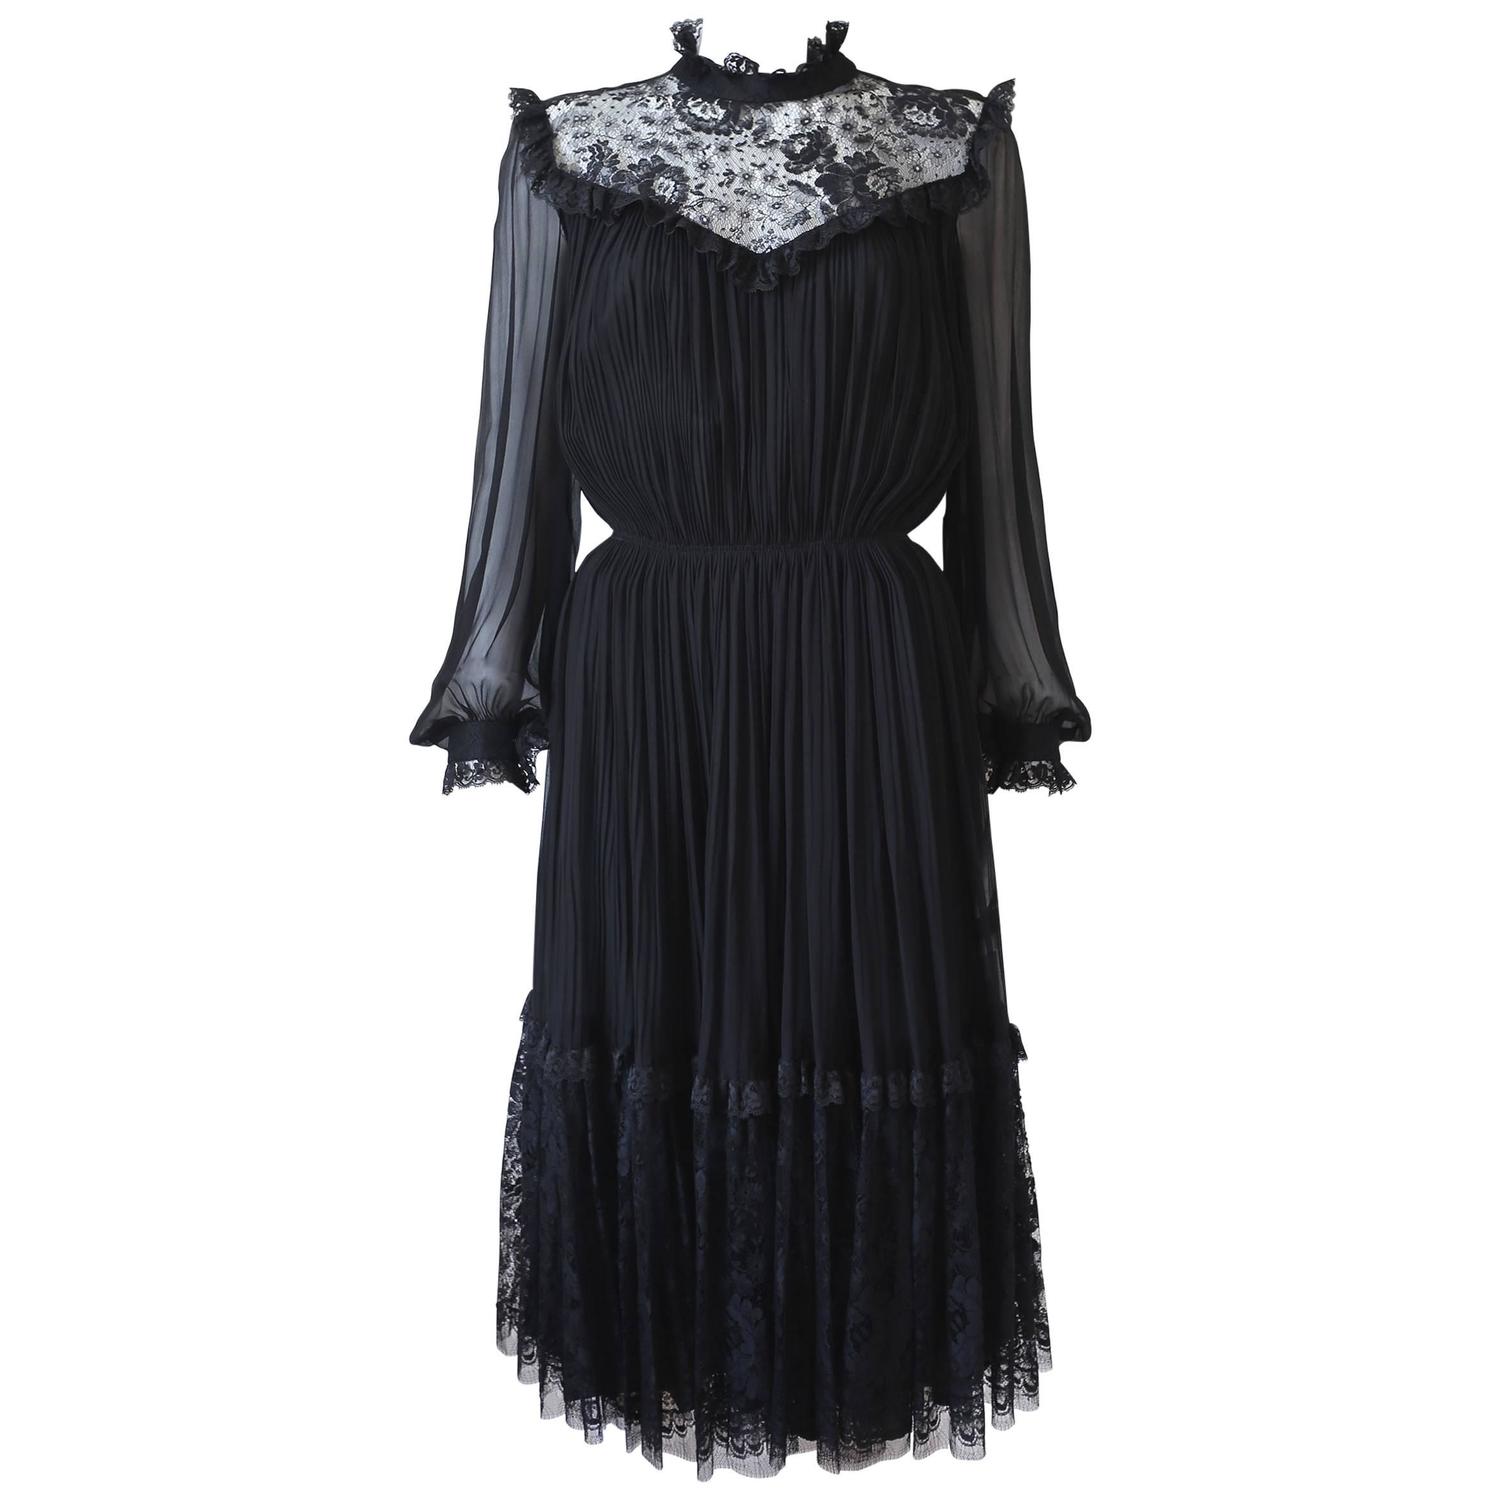 Hardy Amies pleated evening dress with lace, c. 1970s For Sale at 1stdibs